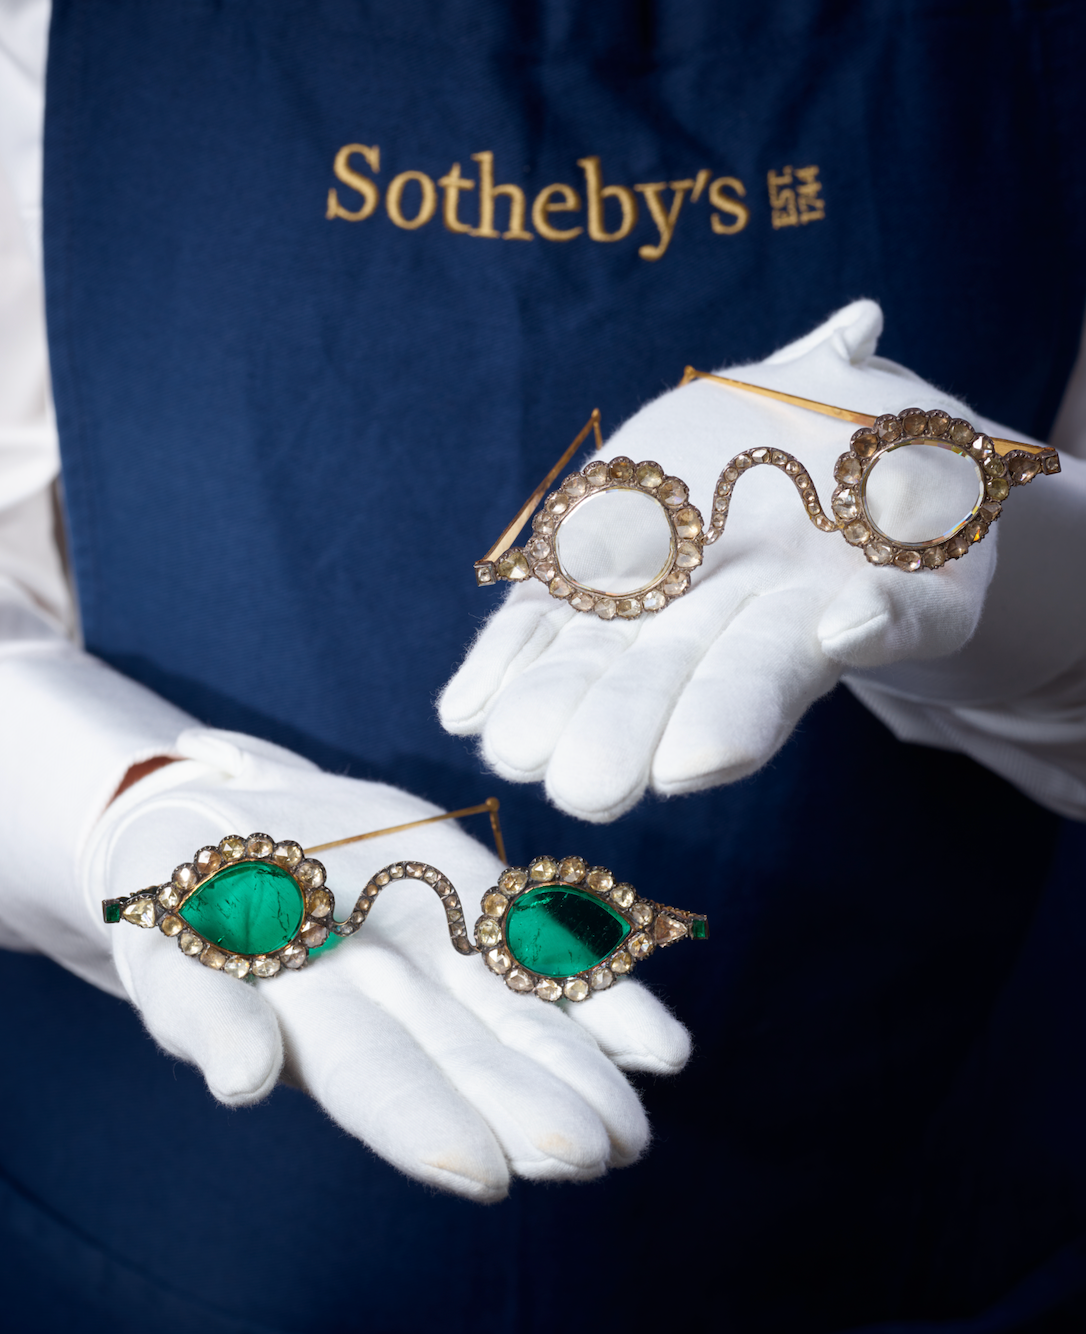 Bejeweled 17th century eyeglasses on block at Sotheby’s